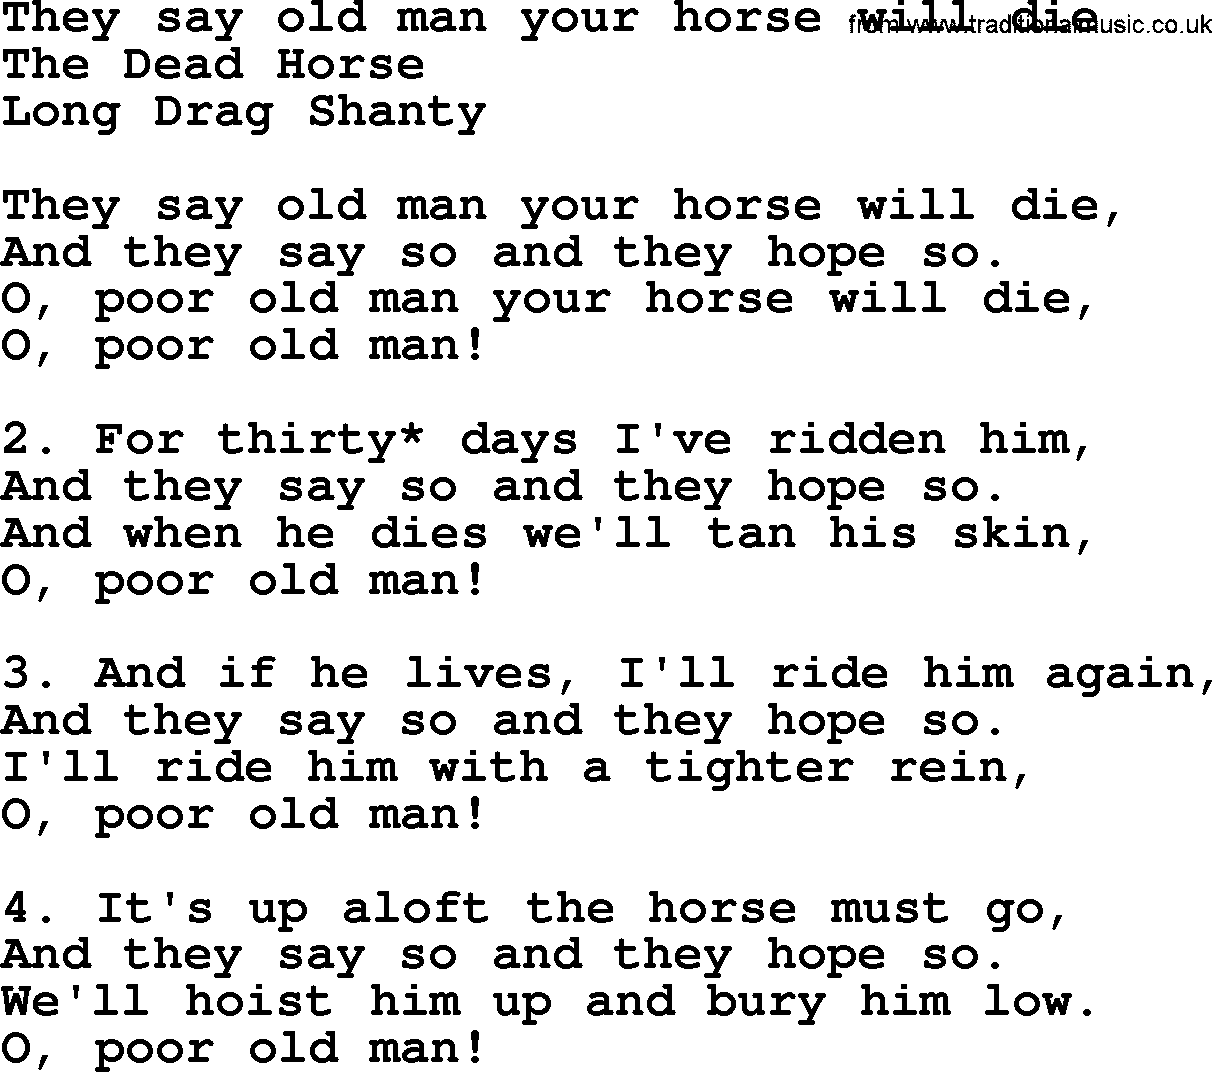 Sea Song or Shantie: They Say Old Man Your Horse Will Die, lyrics